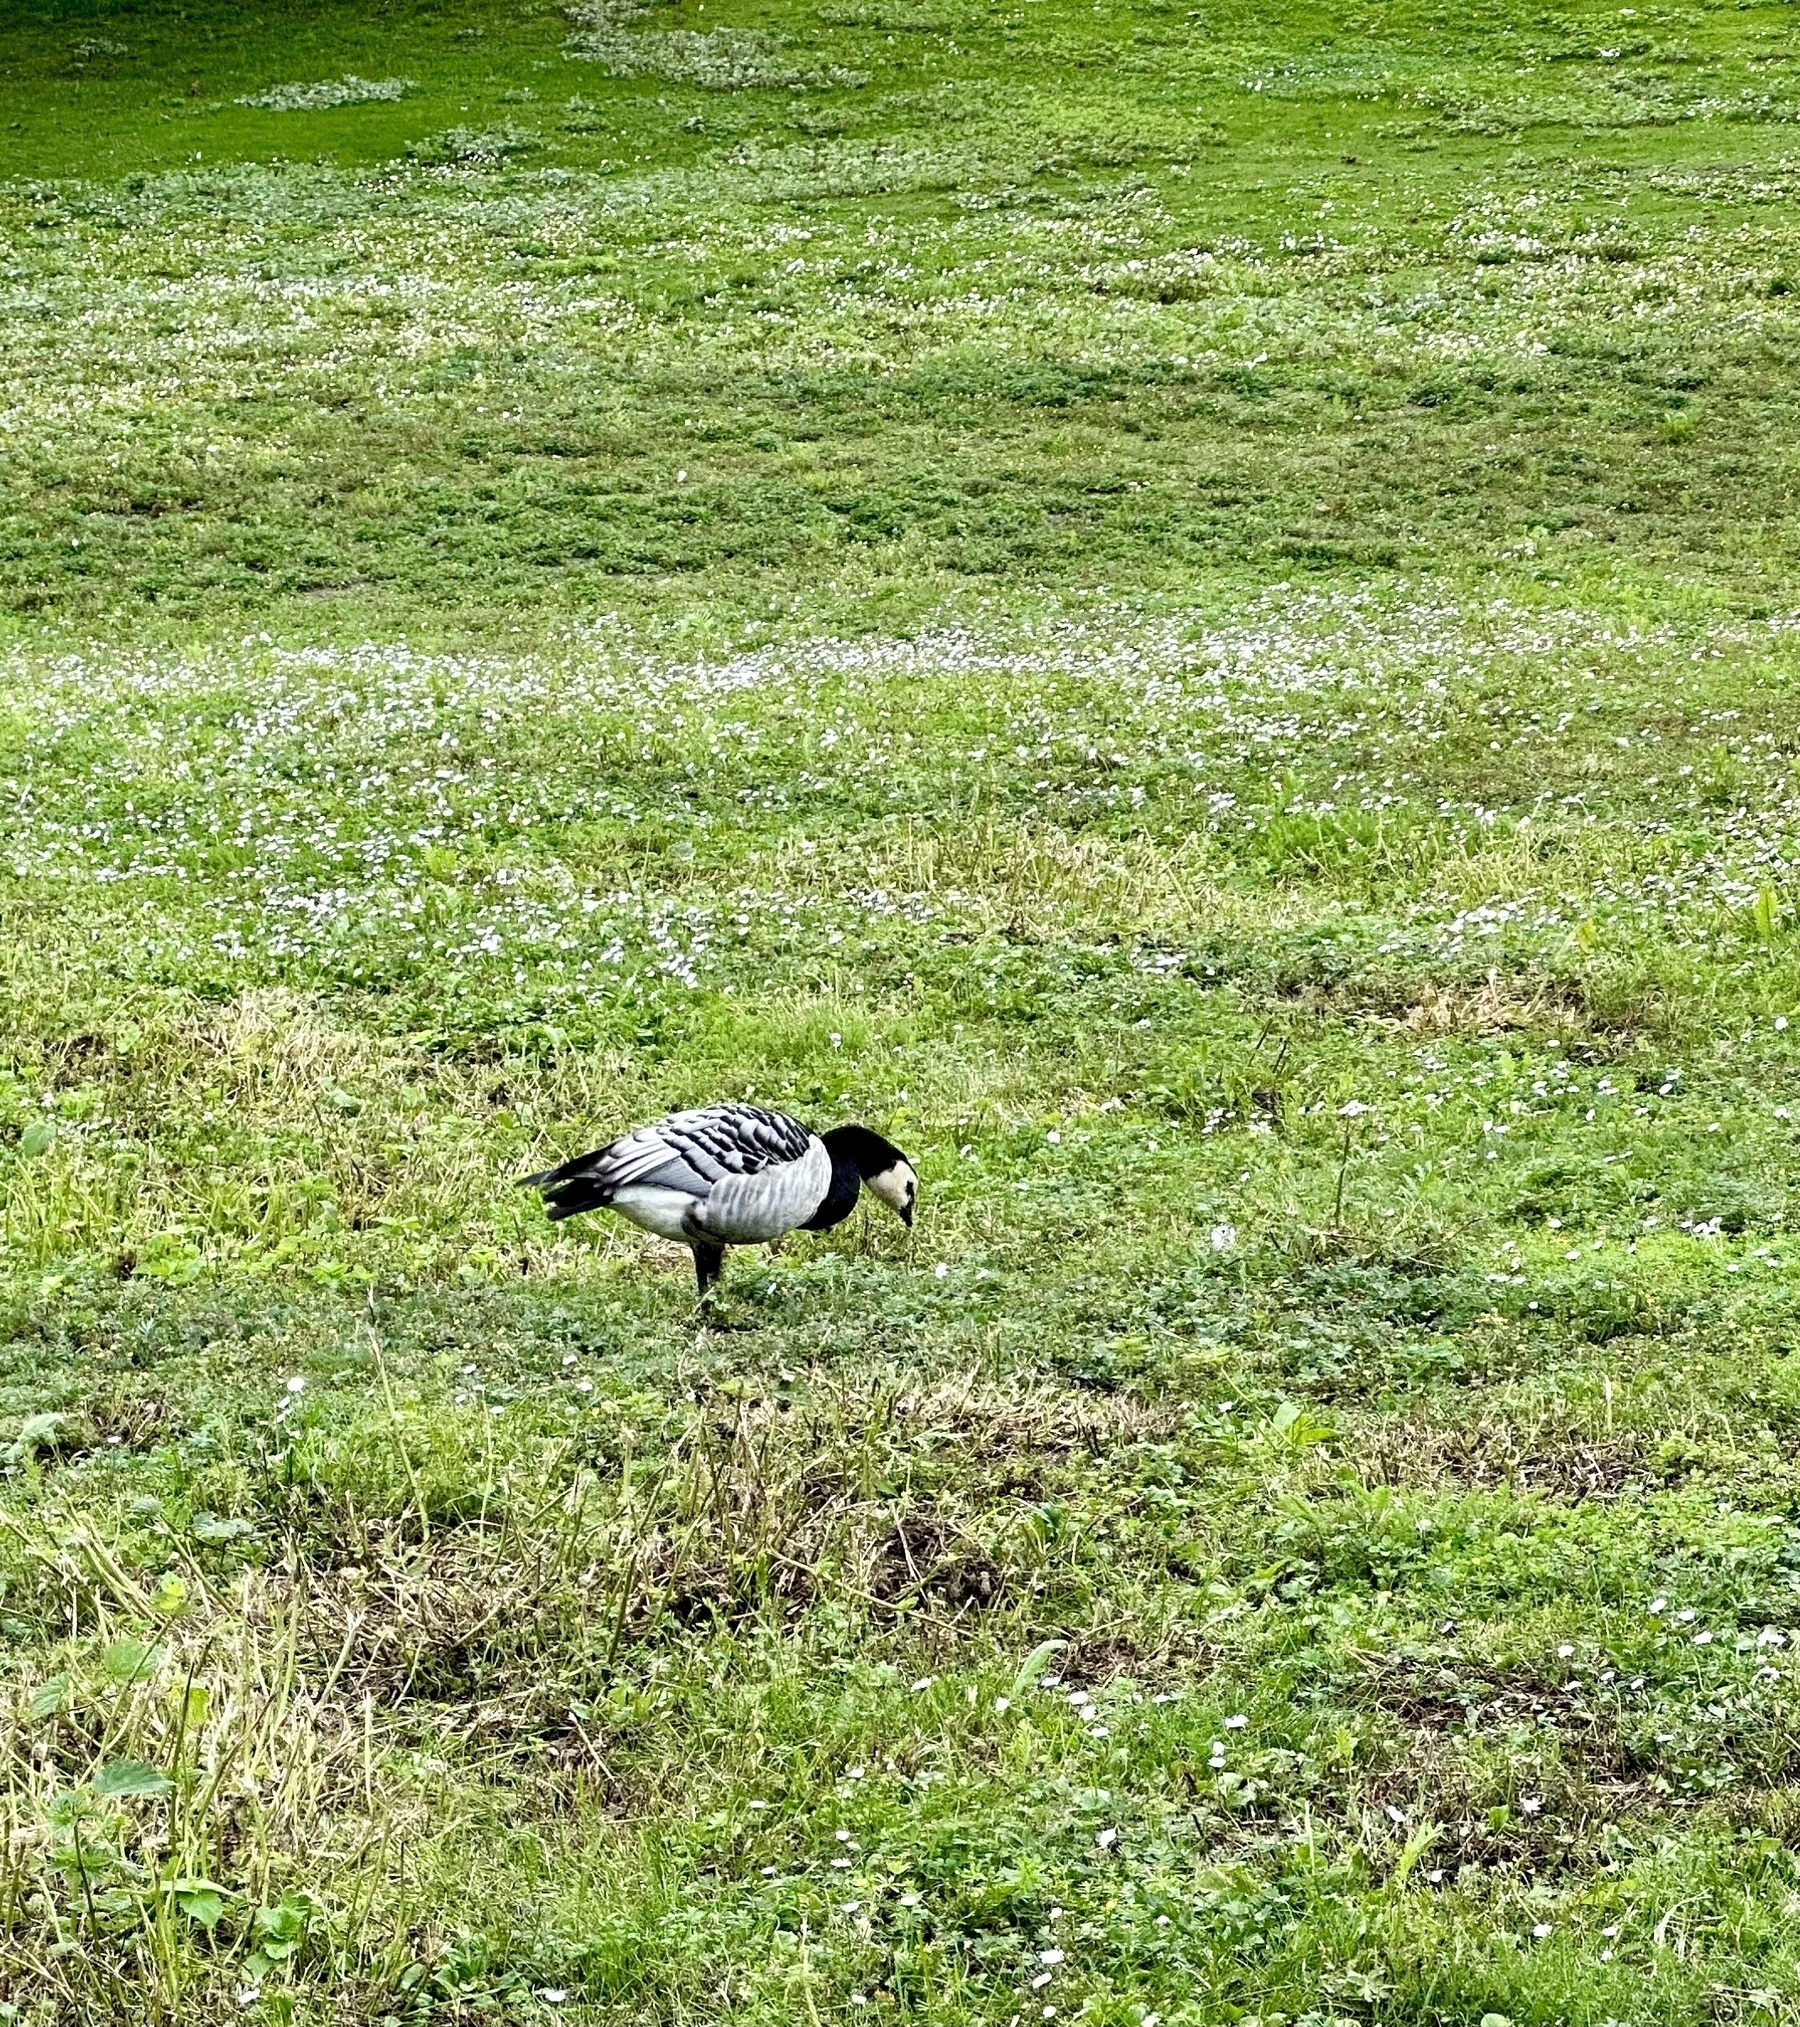 A Barnacle Goose standing on some grass.